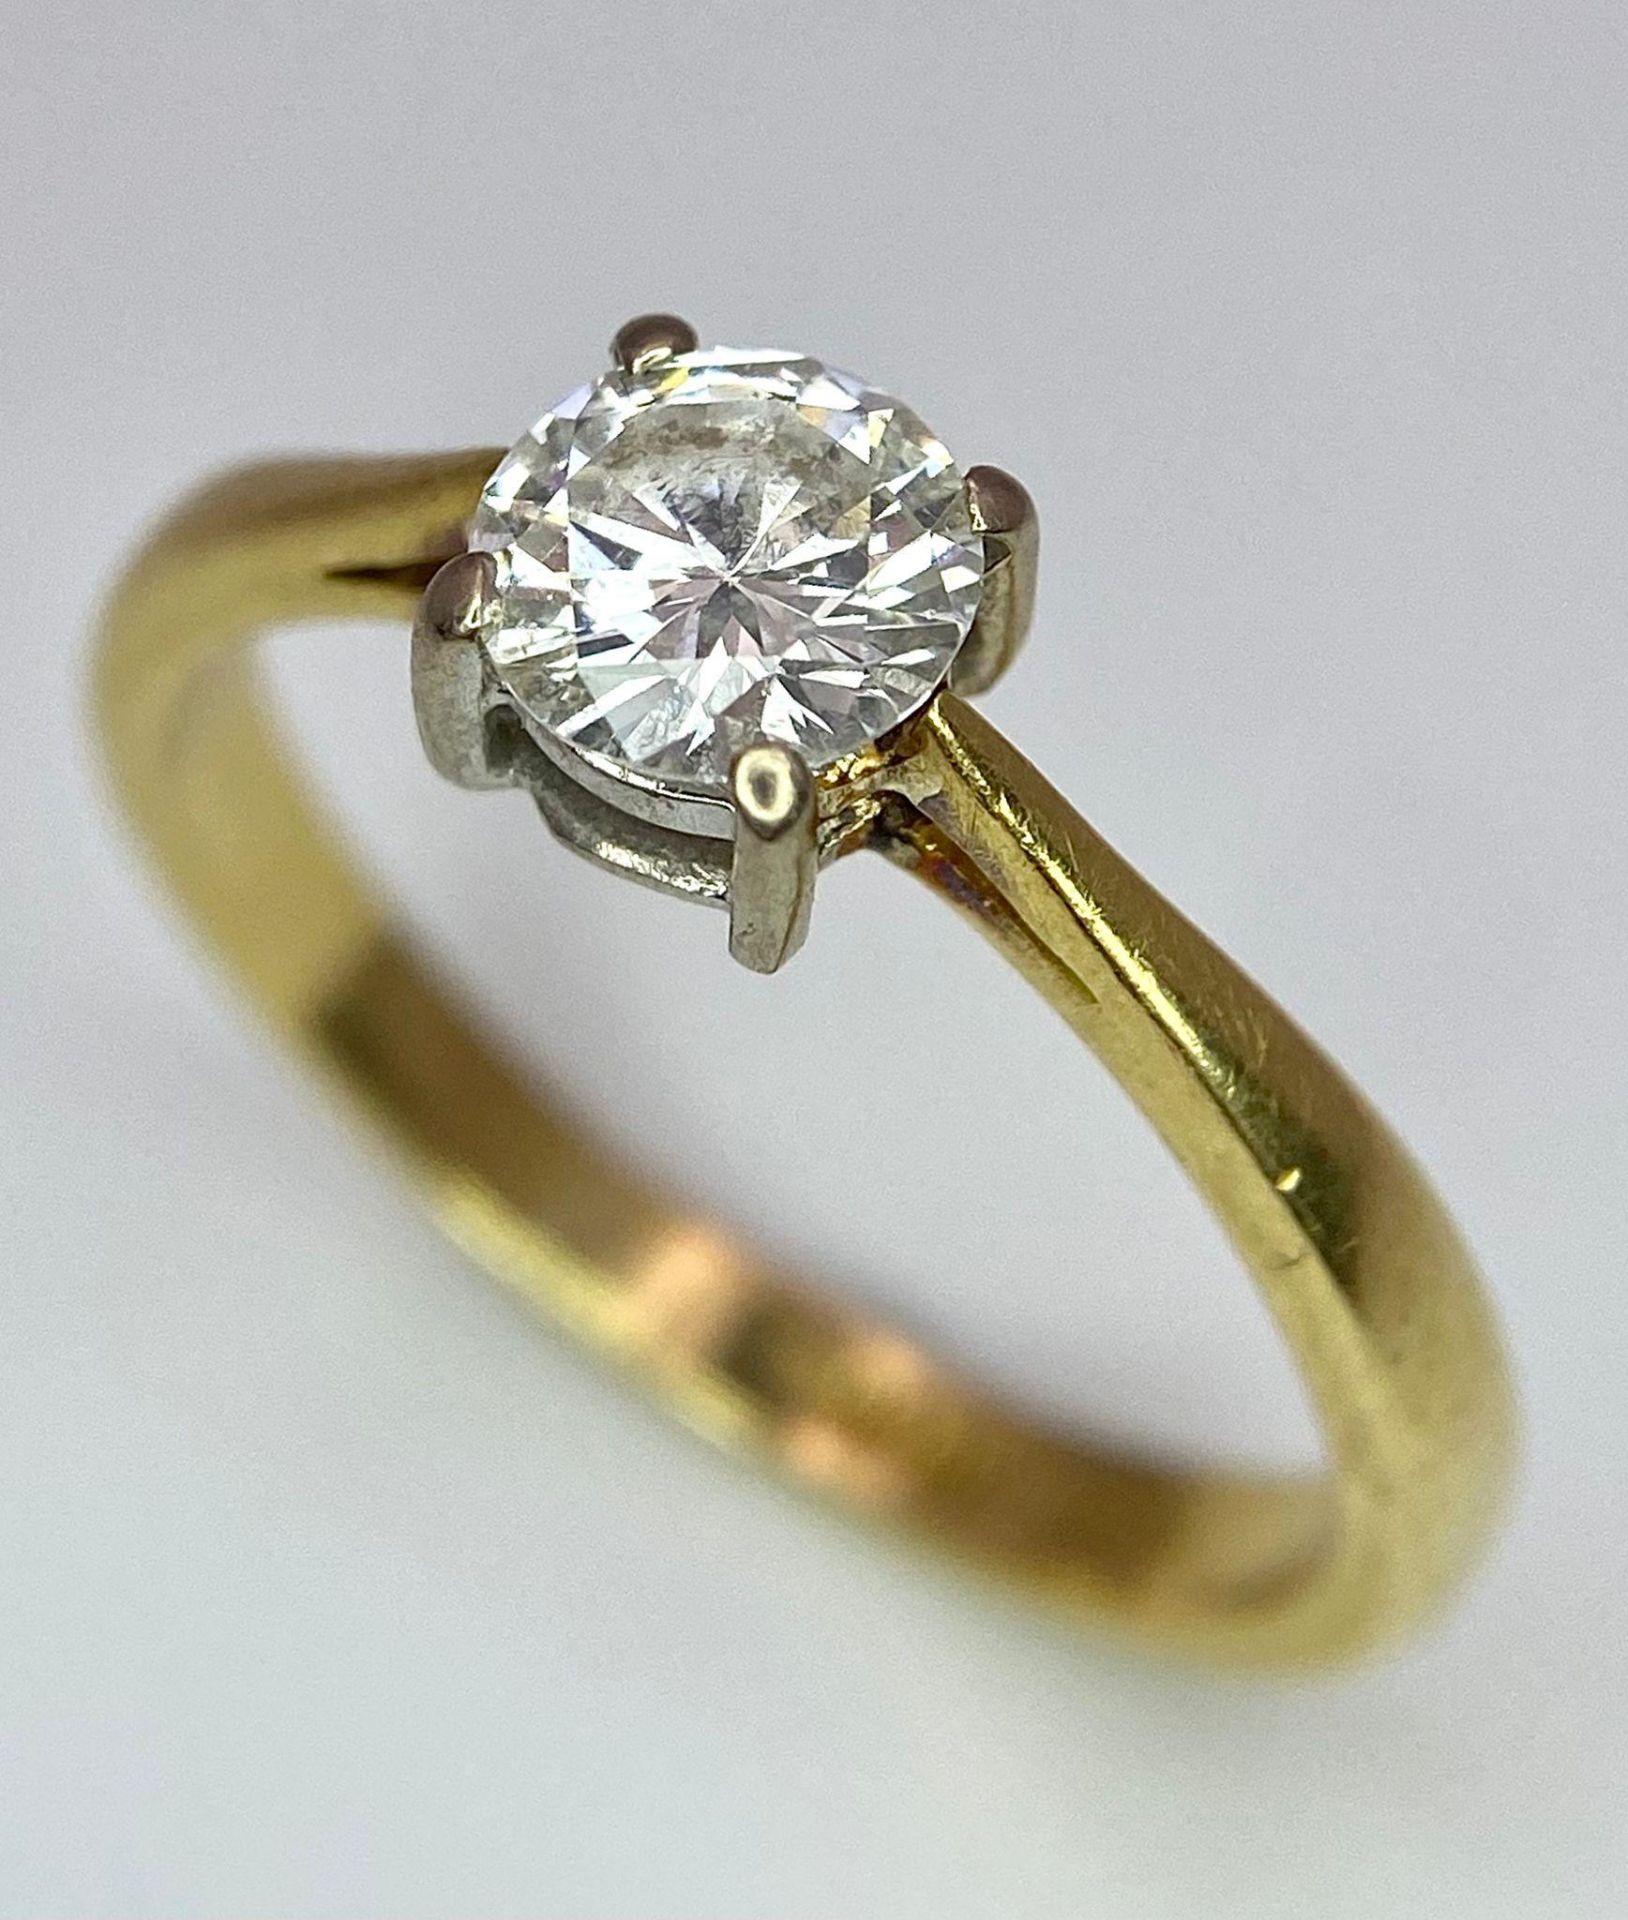 An 18K Yellow Gold Diamond Solitaire Ring. Brilliant round cut - 0.45ctw. 2.5g total weight. Size L.